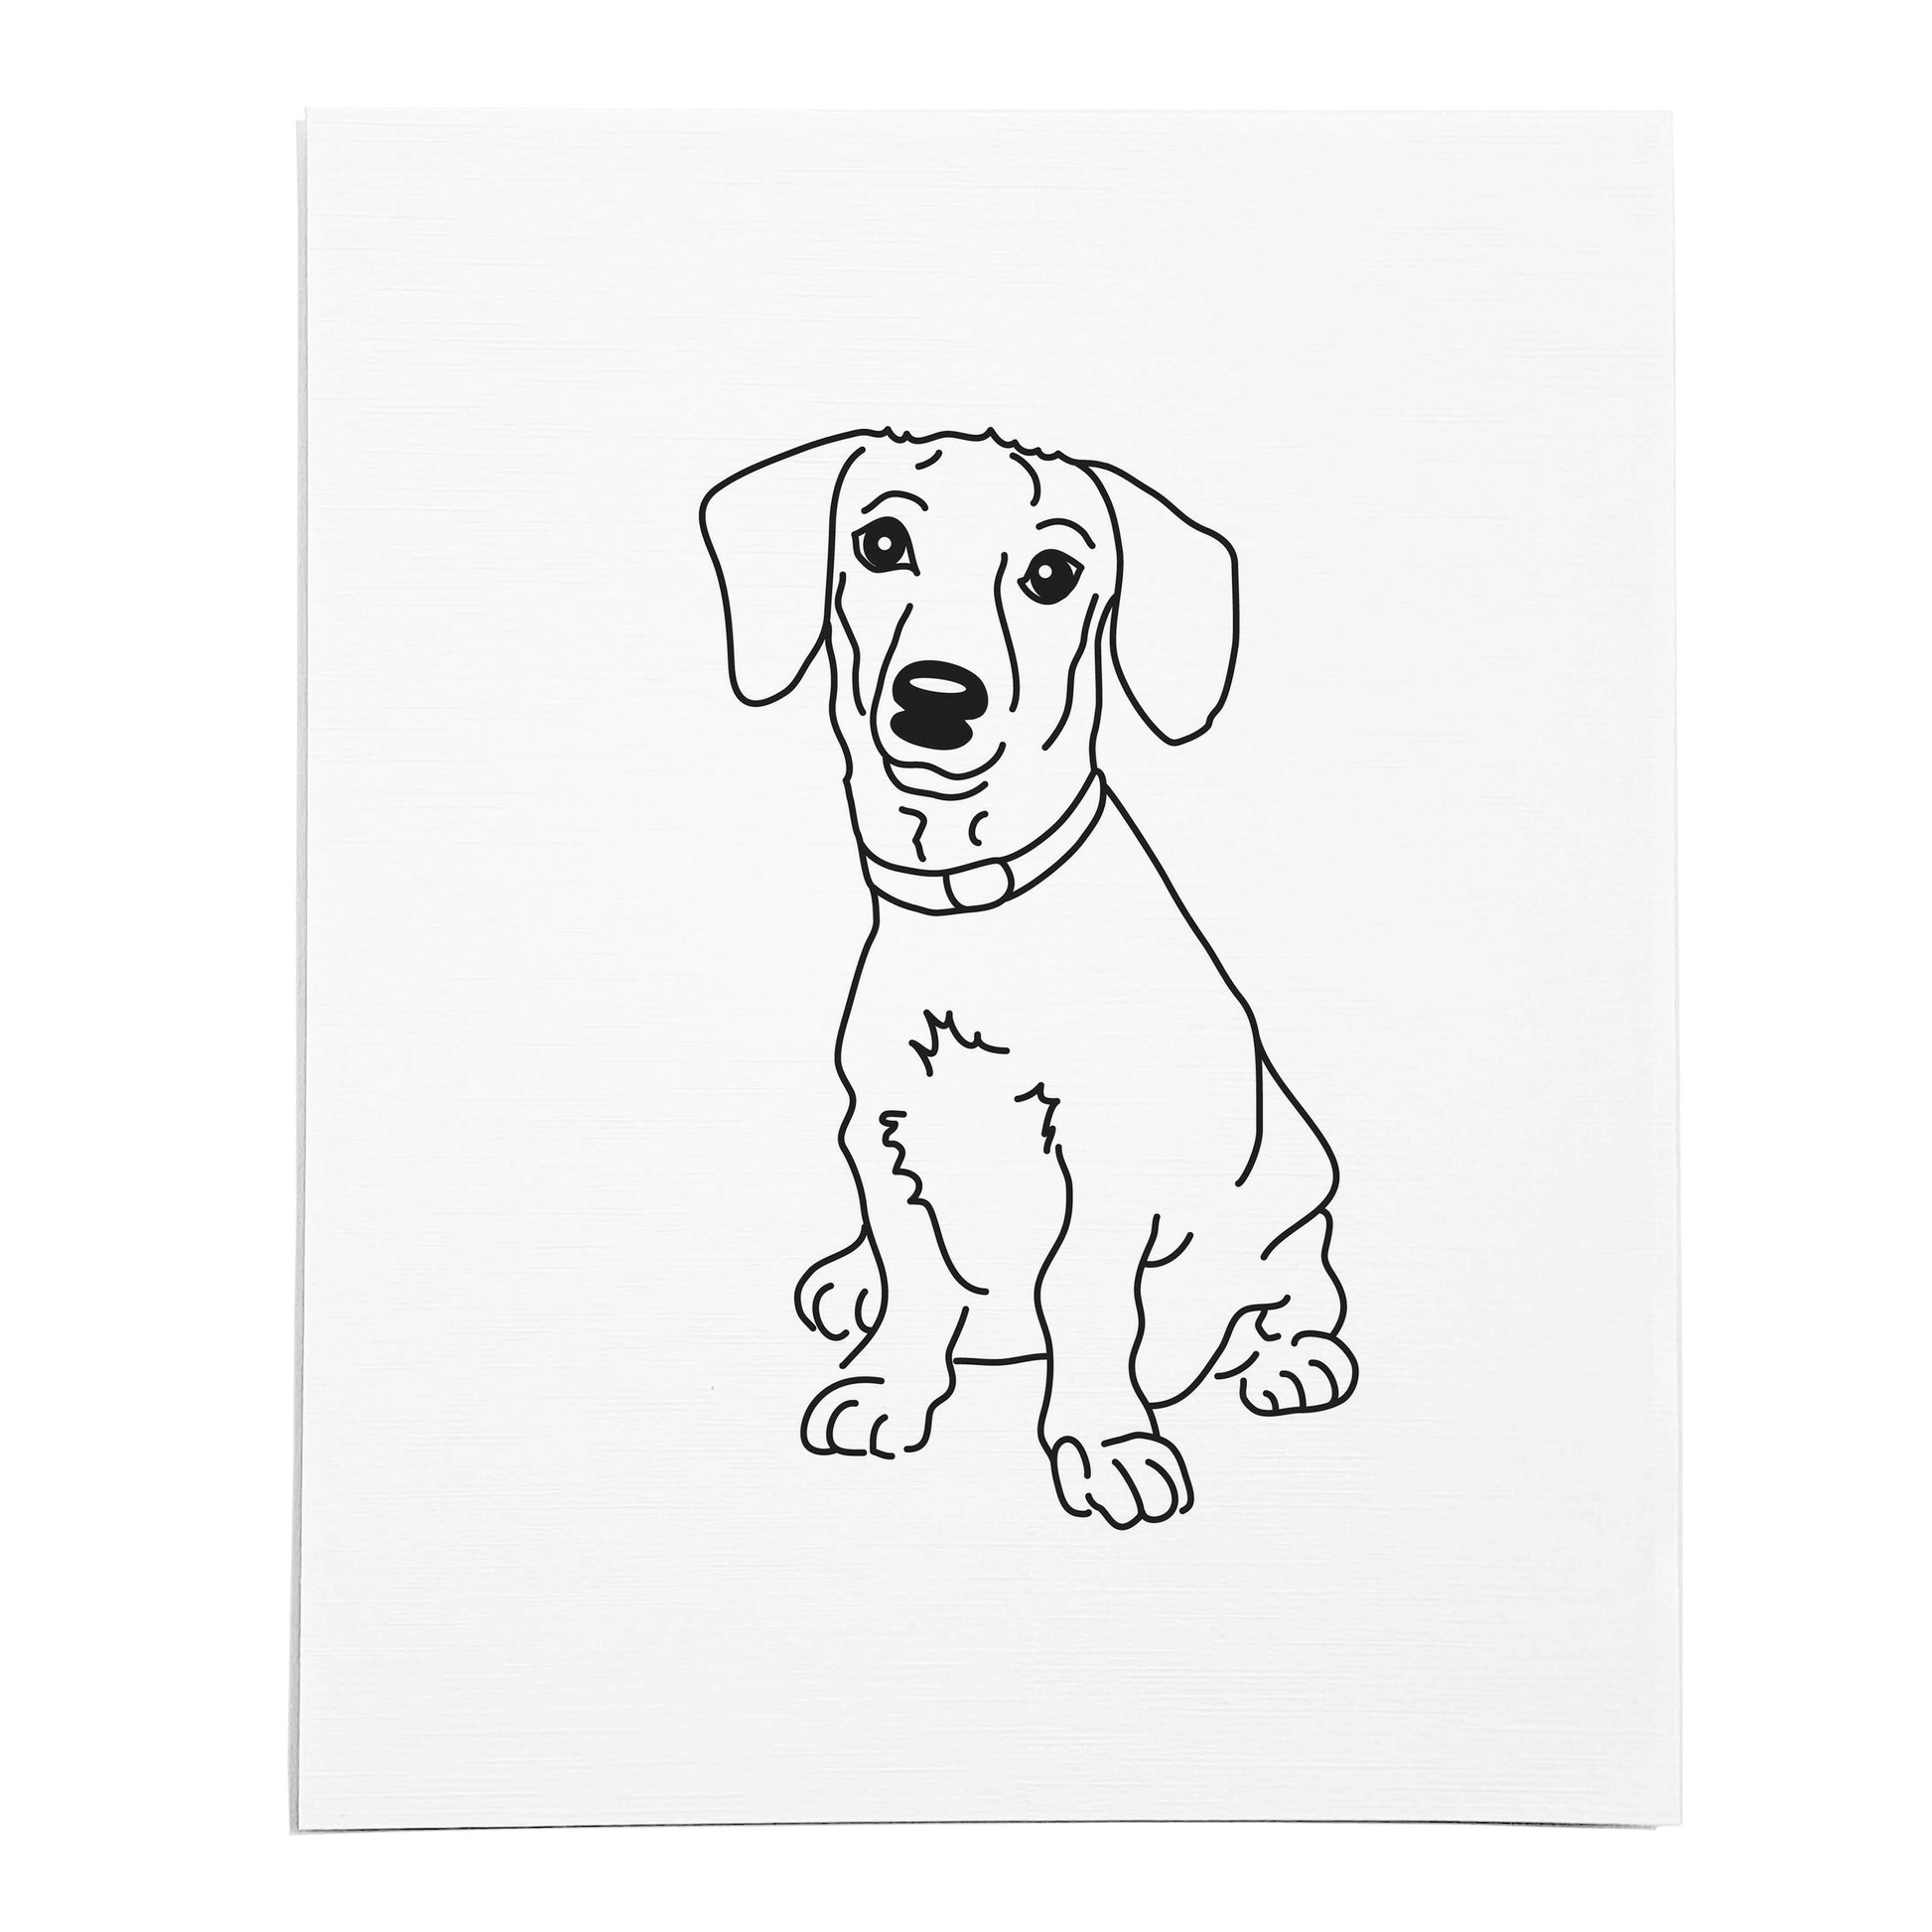 An art print featuring a line drawing of a Dachshund dog on white linen paper